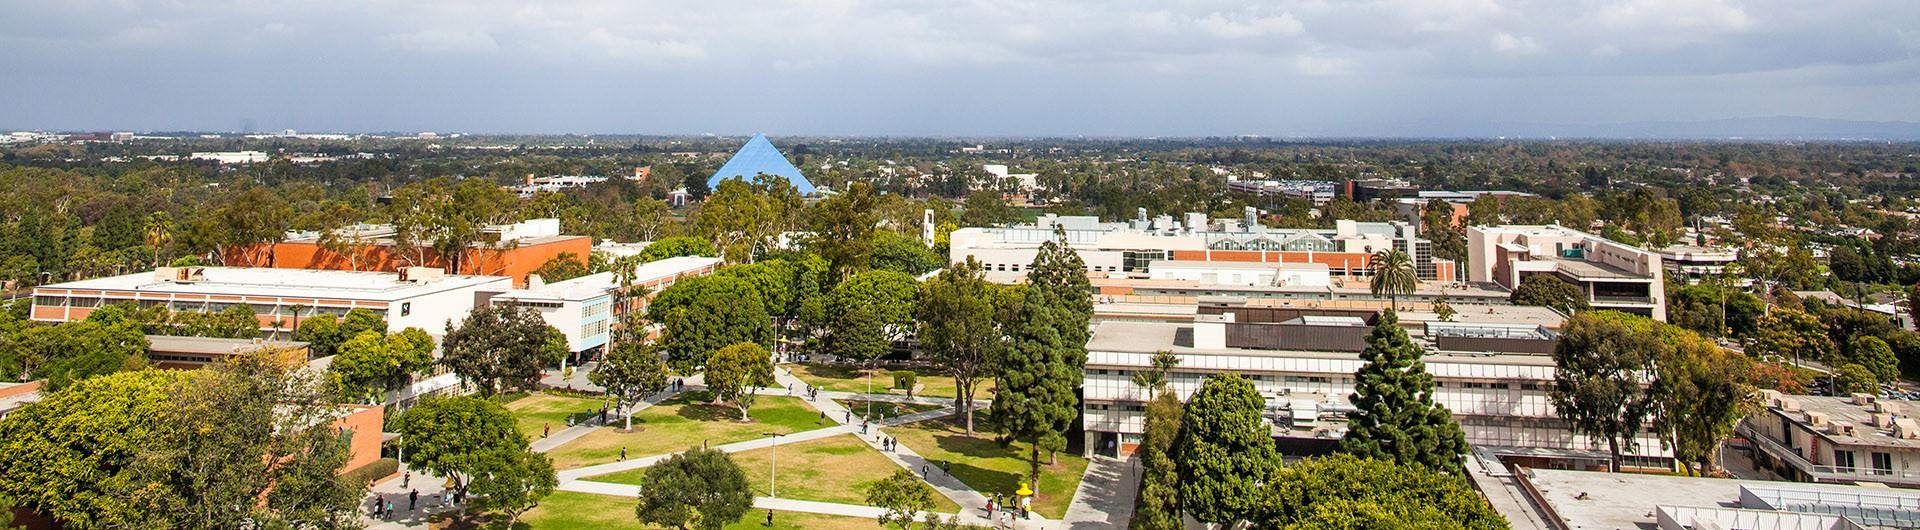 aerial view of campus with pyramid